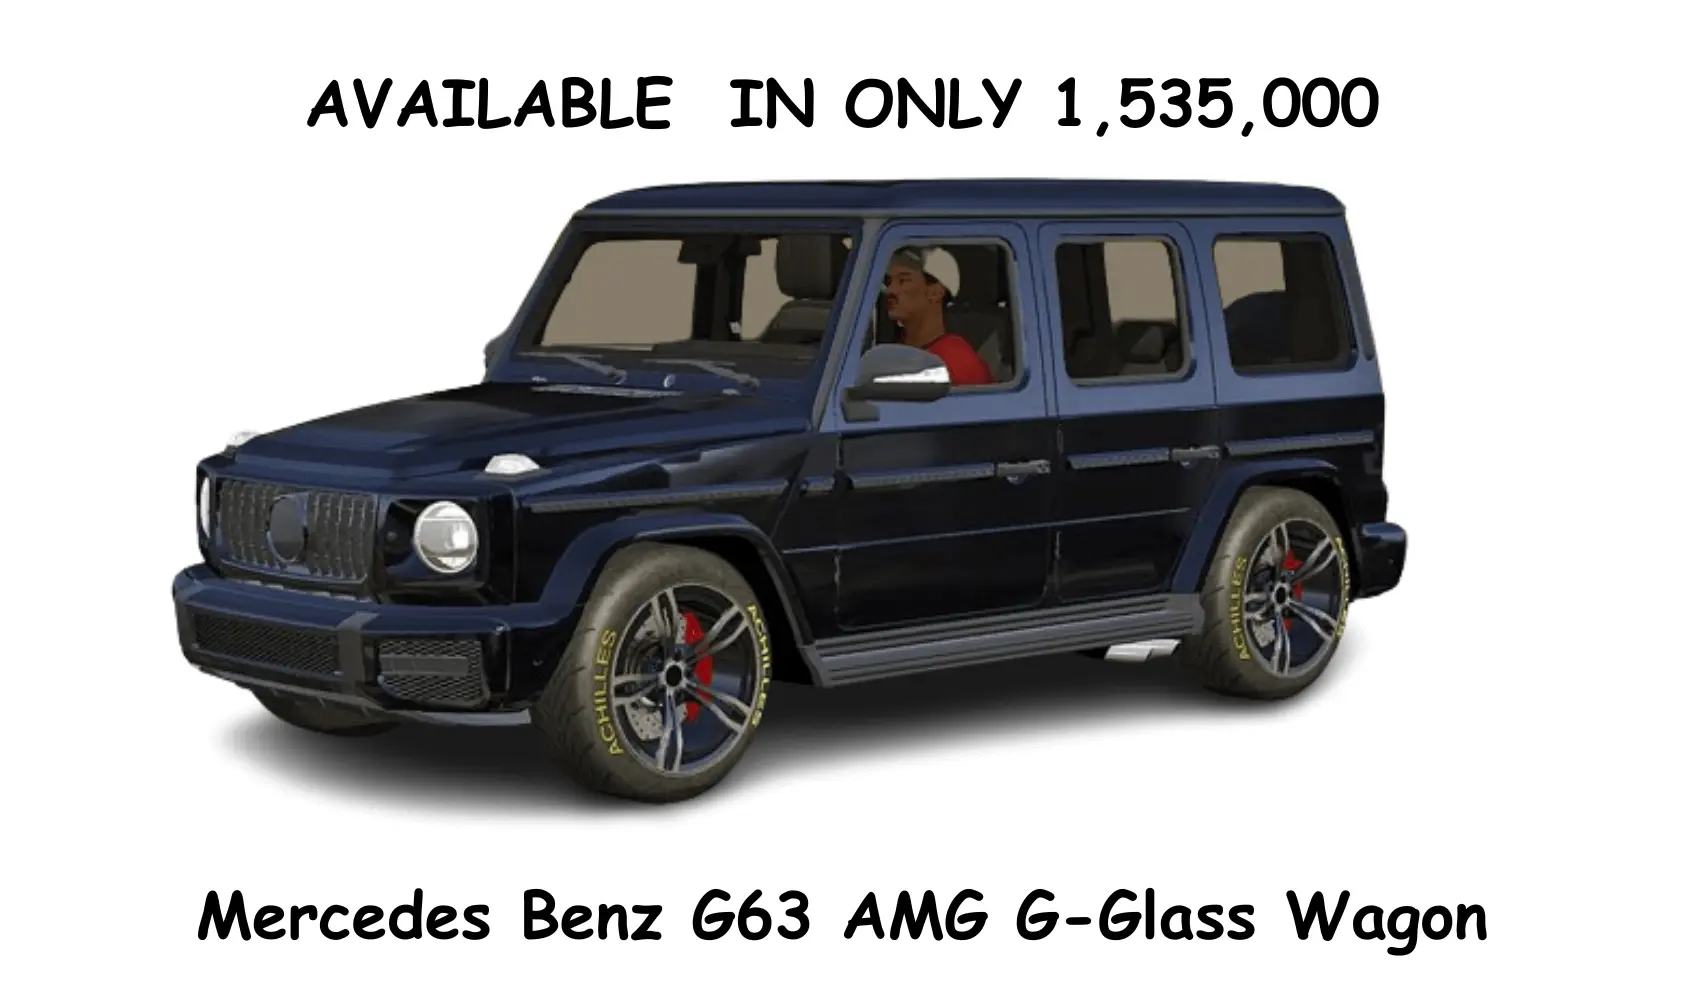 Mercedes Benz G63 AMG G-Glass Wagon PRICE IN CAR PARKING MULTIPLAYER